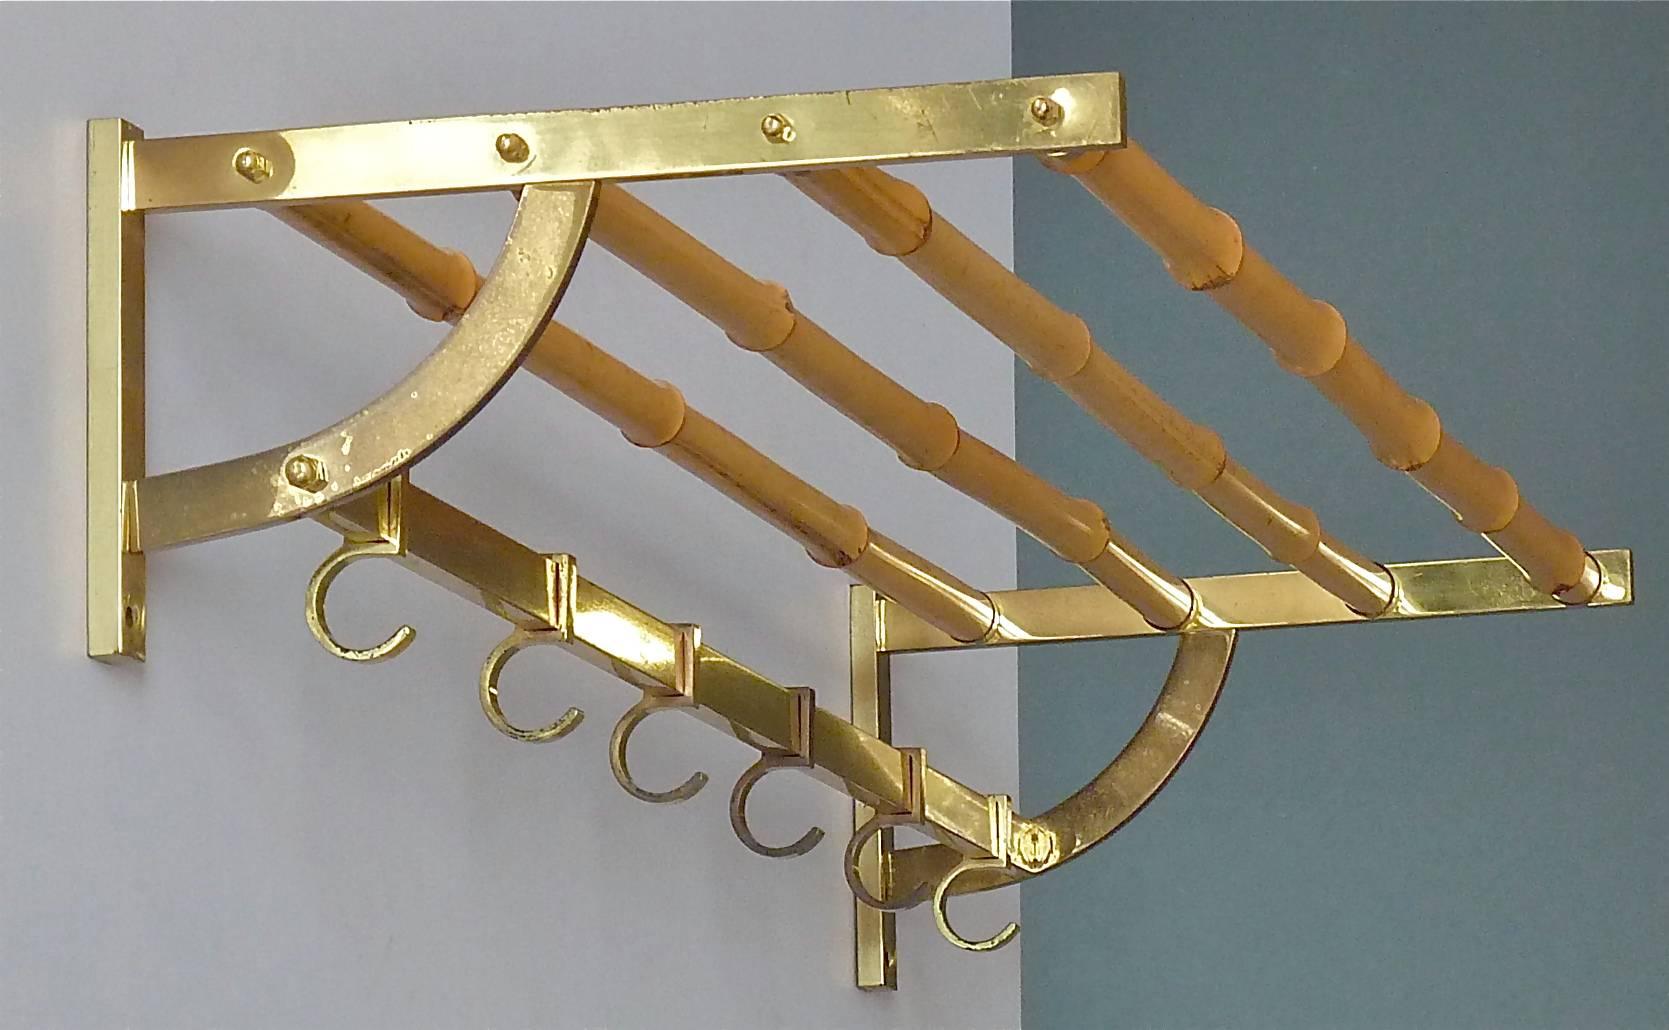 Stunning and exceptional modernist coat rack or wall wardrobe, which has been designed and executed in the 1950s in Austria, probably it belongs to one of the wonderful designs by Auböck, Hagenauer, Josef Frank for Haus & Garten or Kalmar. It is